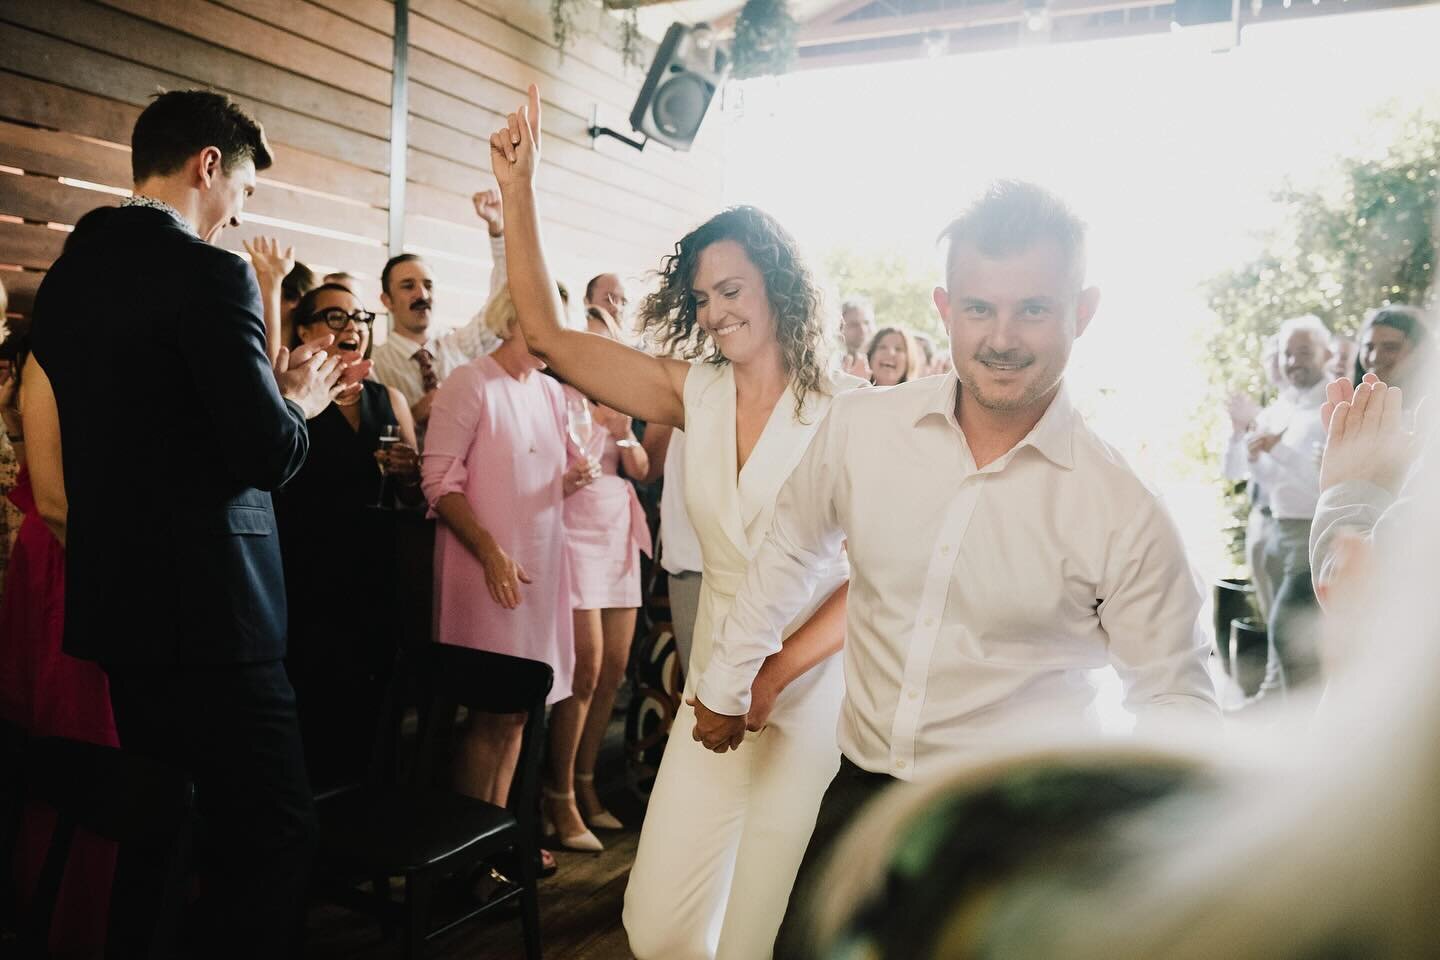 🤎 Mal &amp; Jordan 🤎 

at @pohevents and captured beautifully by @brettscapinphotography !! 

#melbourneweddings #justmarried #melbournecelebrant #localwedding #weddingphotography #weddingceremony #brideandgroom #brideandgroomphotos #melbournemarri